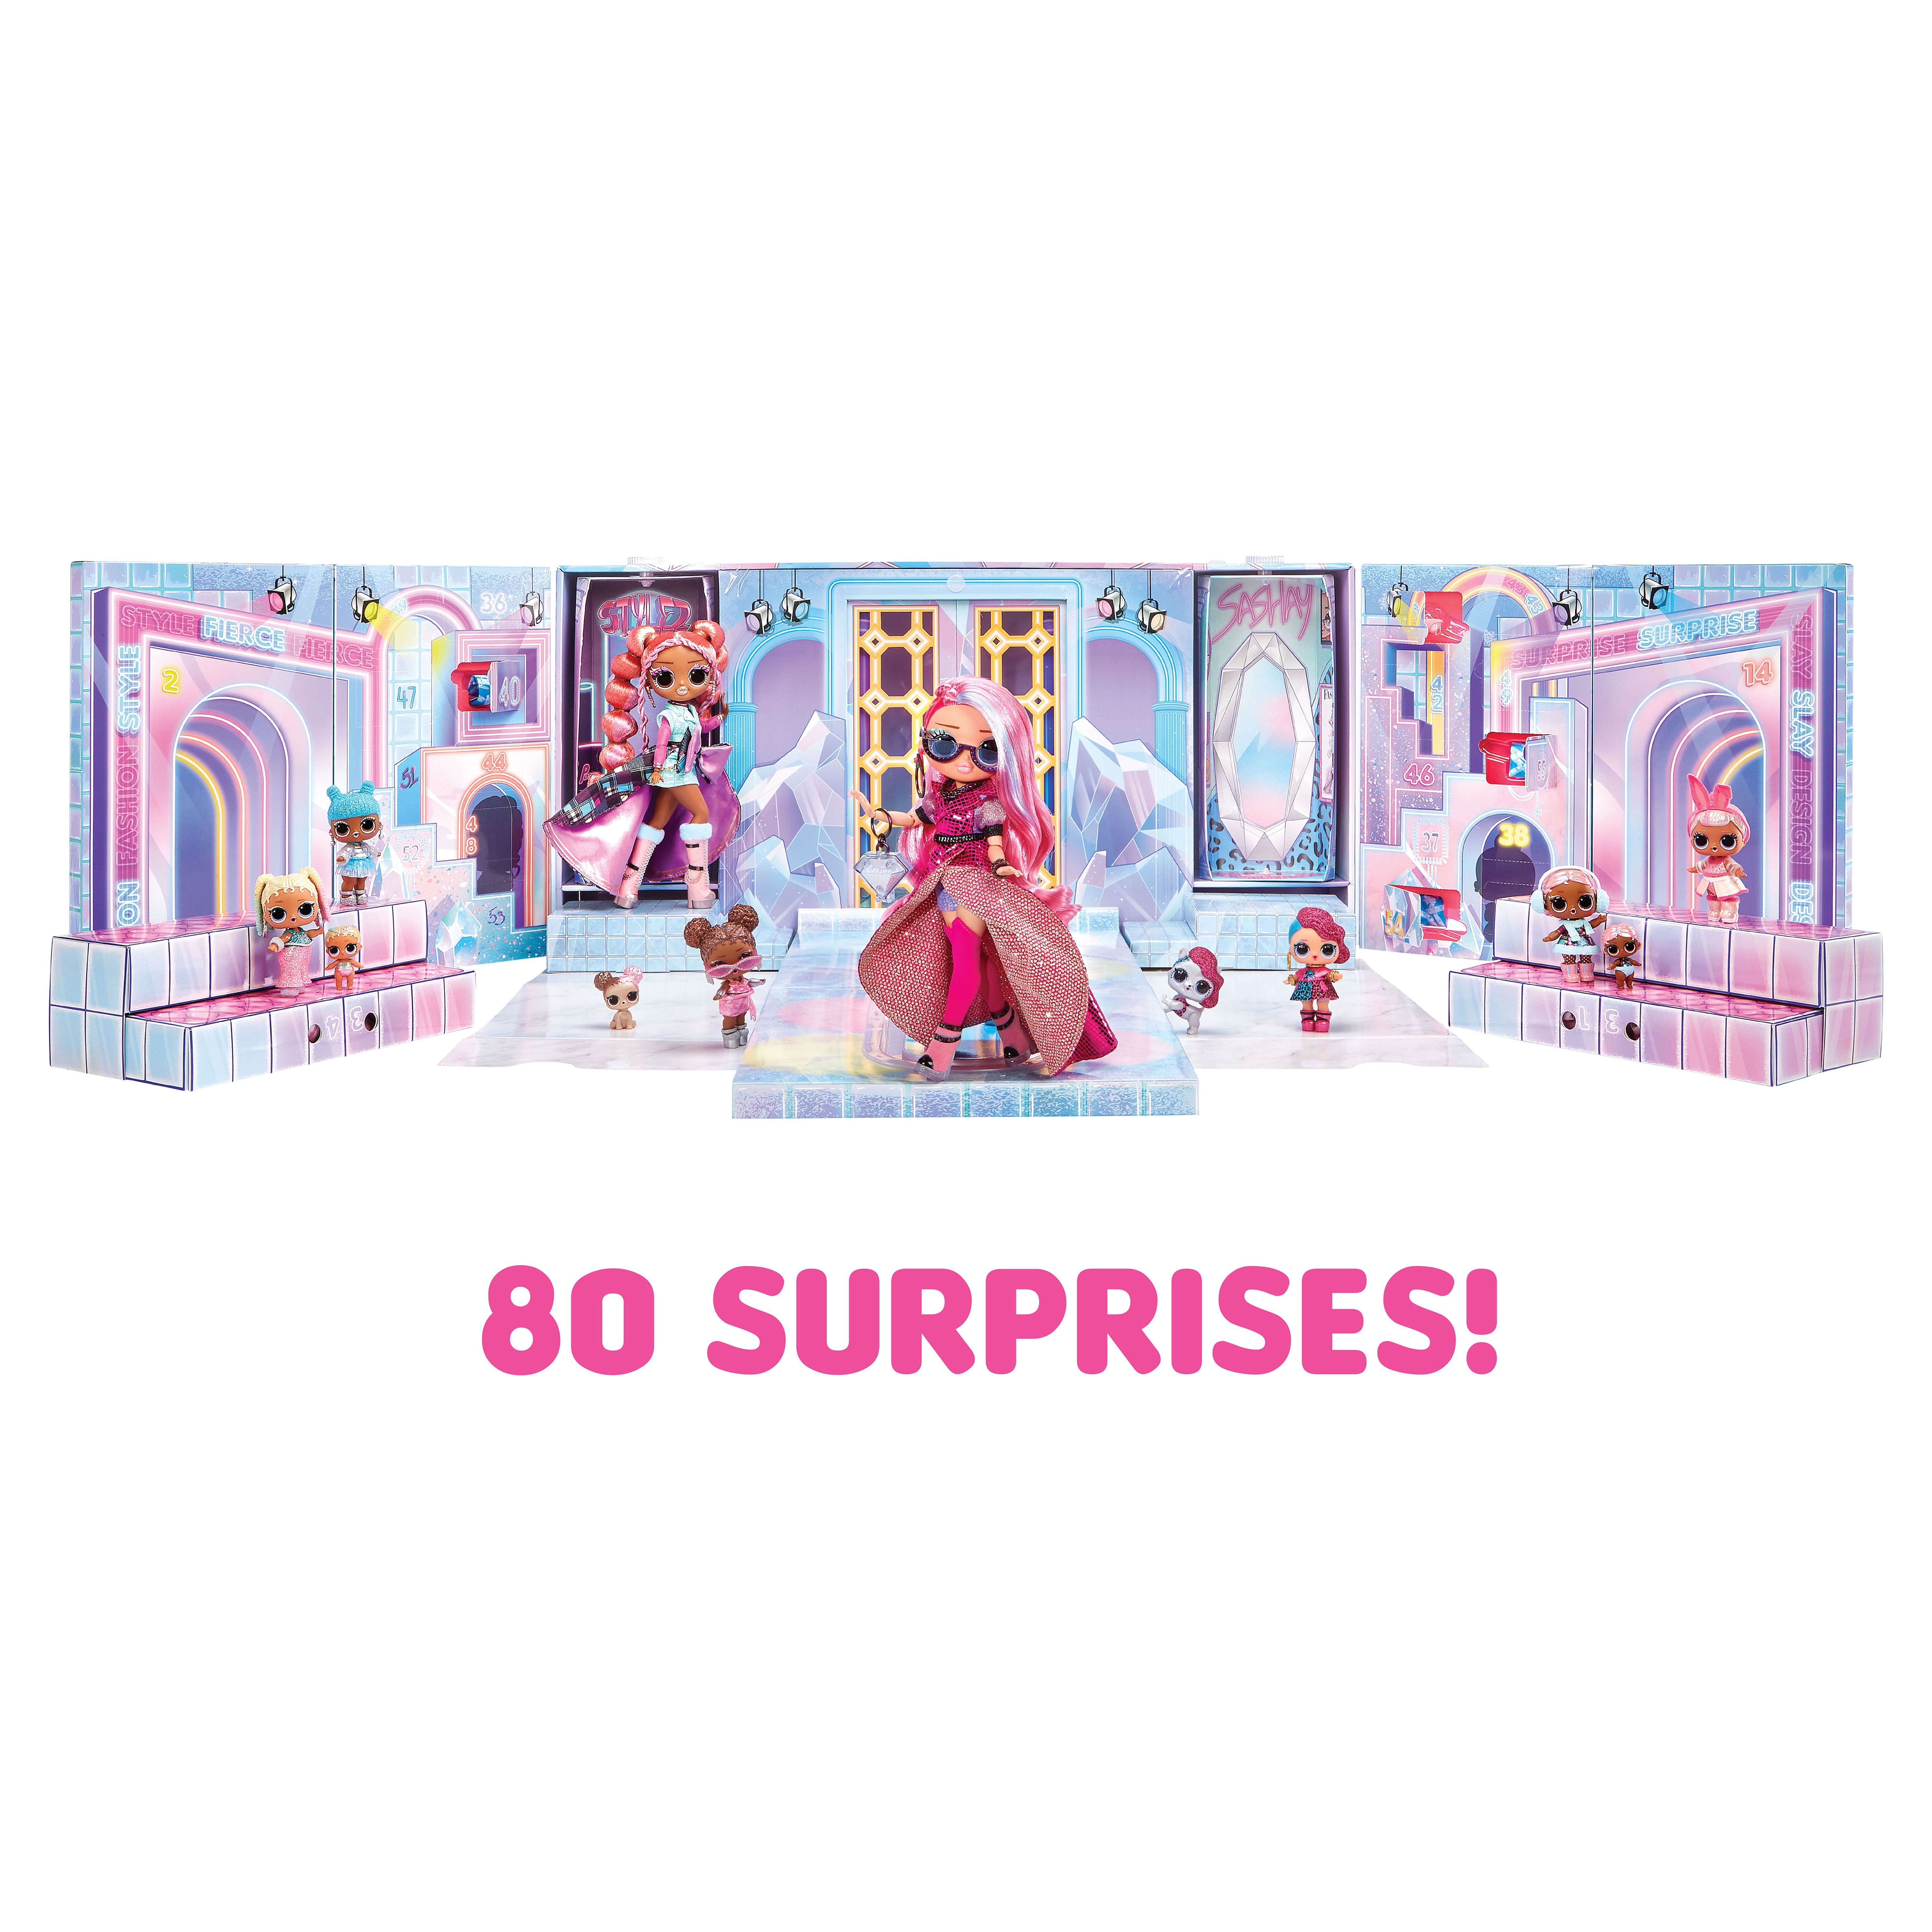 L.O.L. Surprise! House Of Surprises! to air on PopToy World Magazine